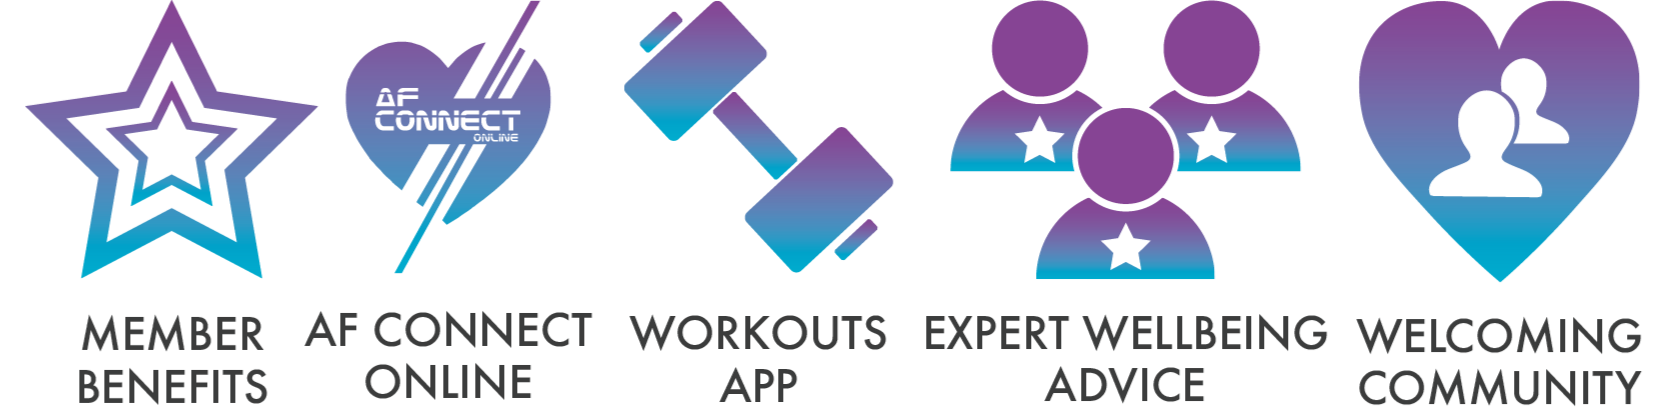 q4 icons for webpage-02 (1) - Anytime Fitness